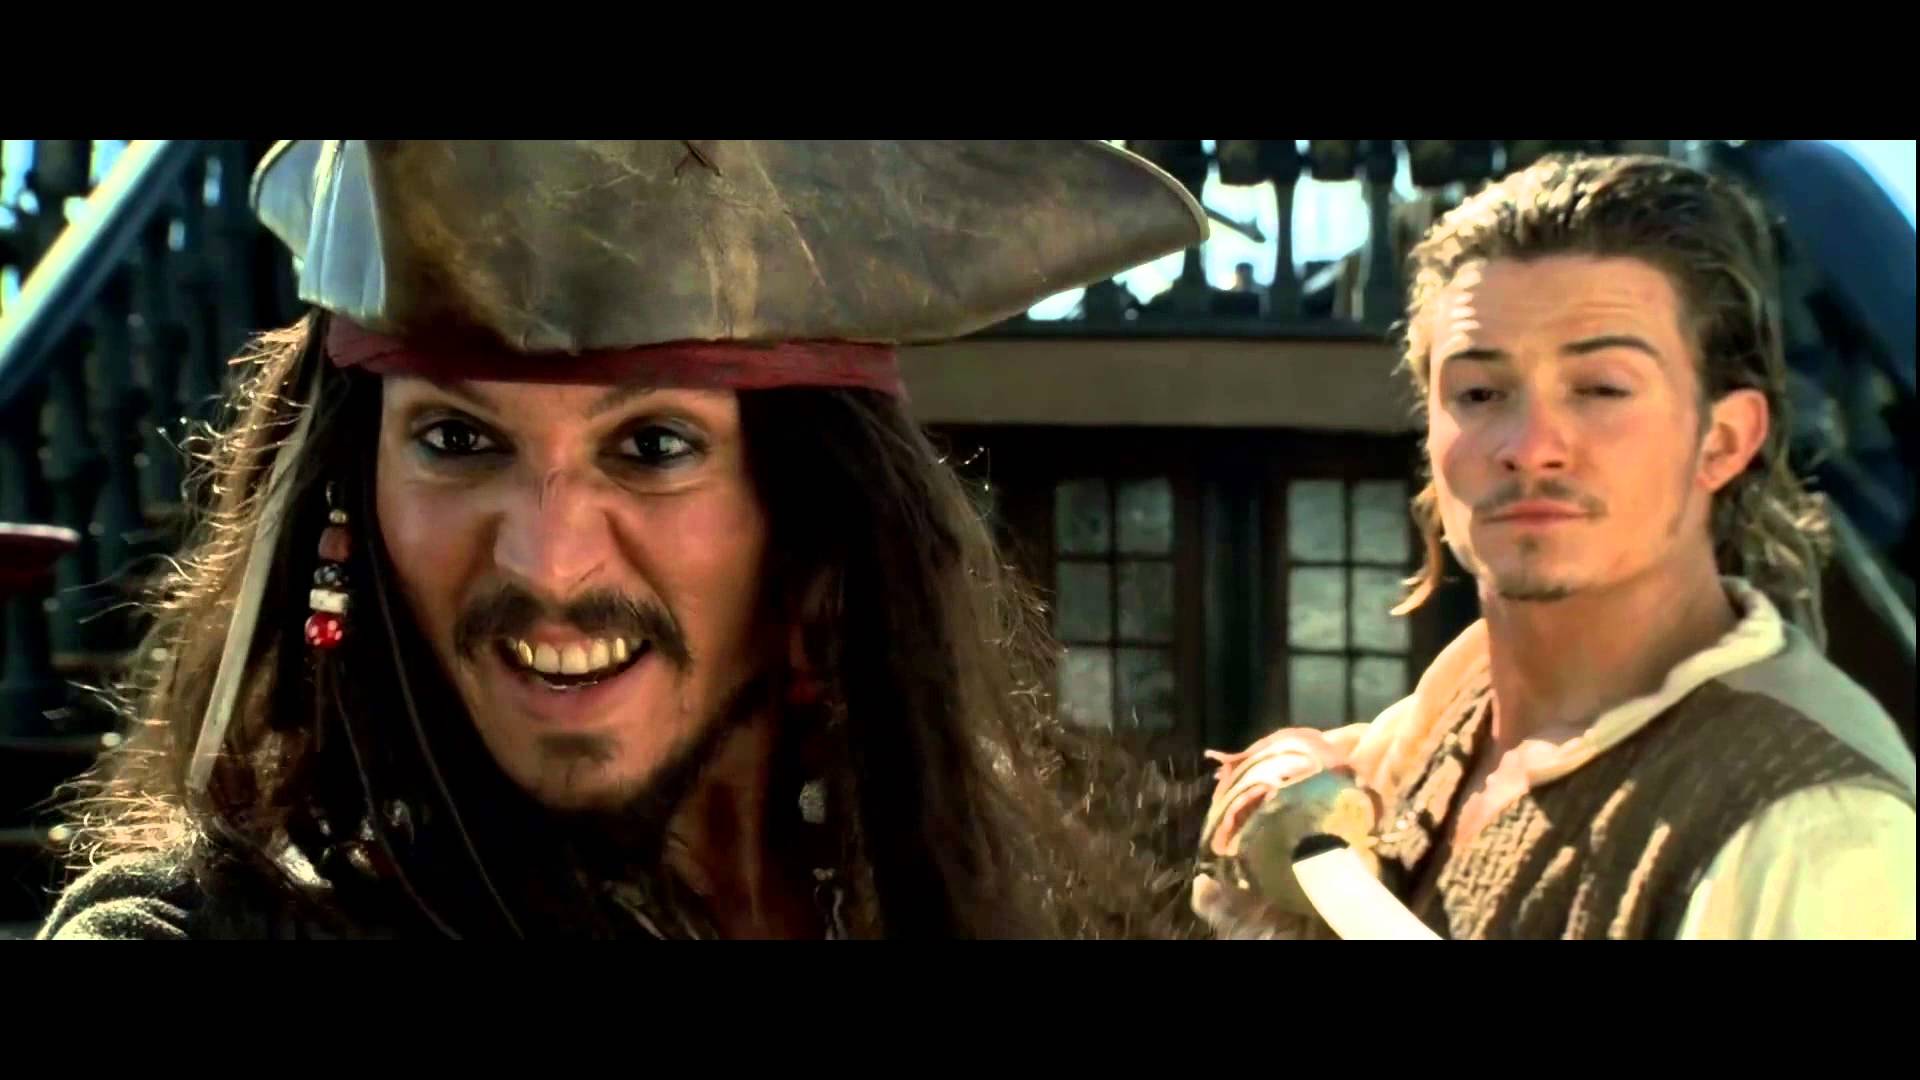 Pirates Of The Caribbean: The Curse Of The Black Pearl HD wallpapers, Desktop wallpaper - most viewed